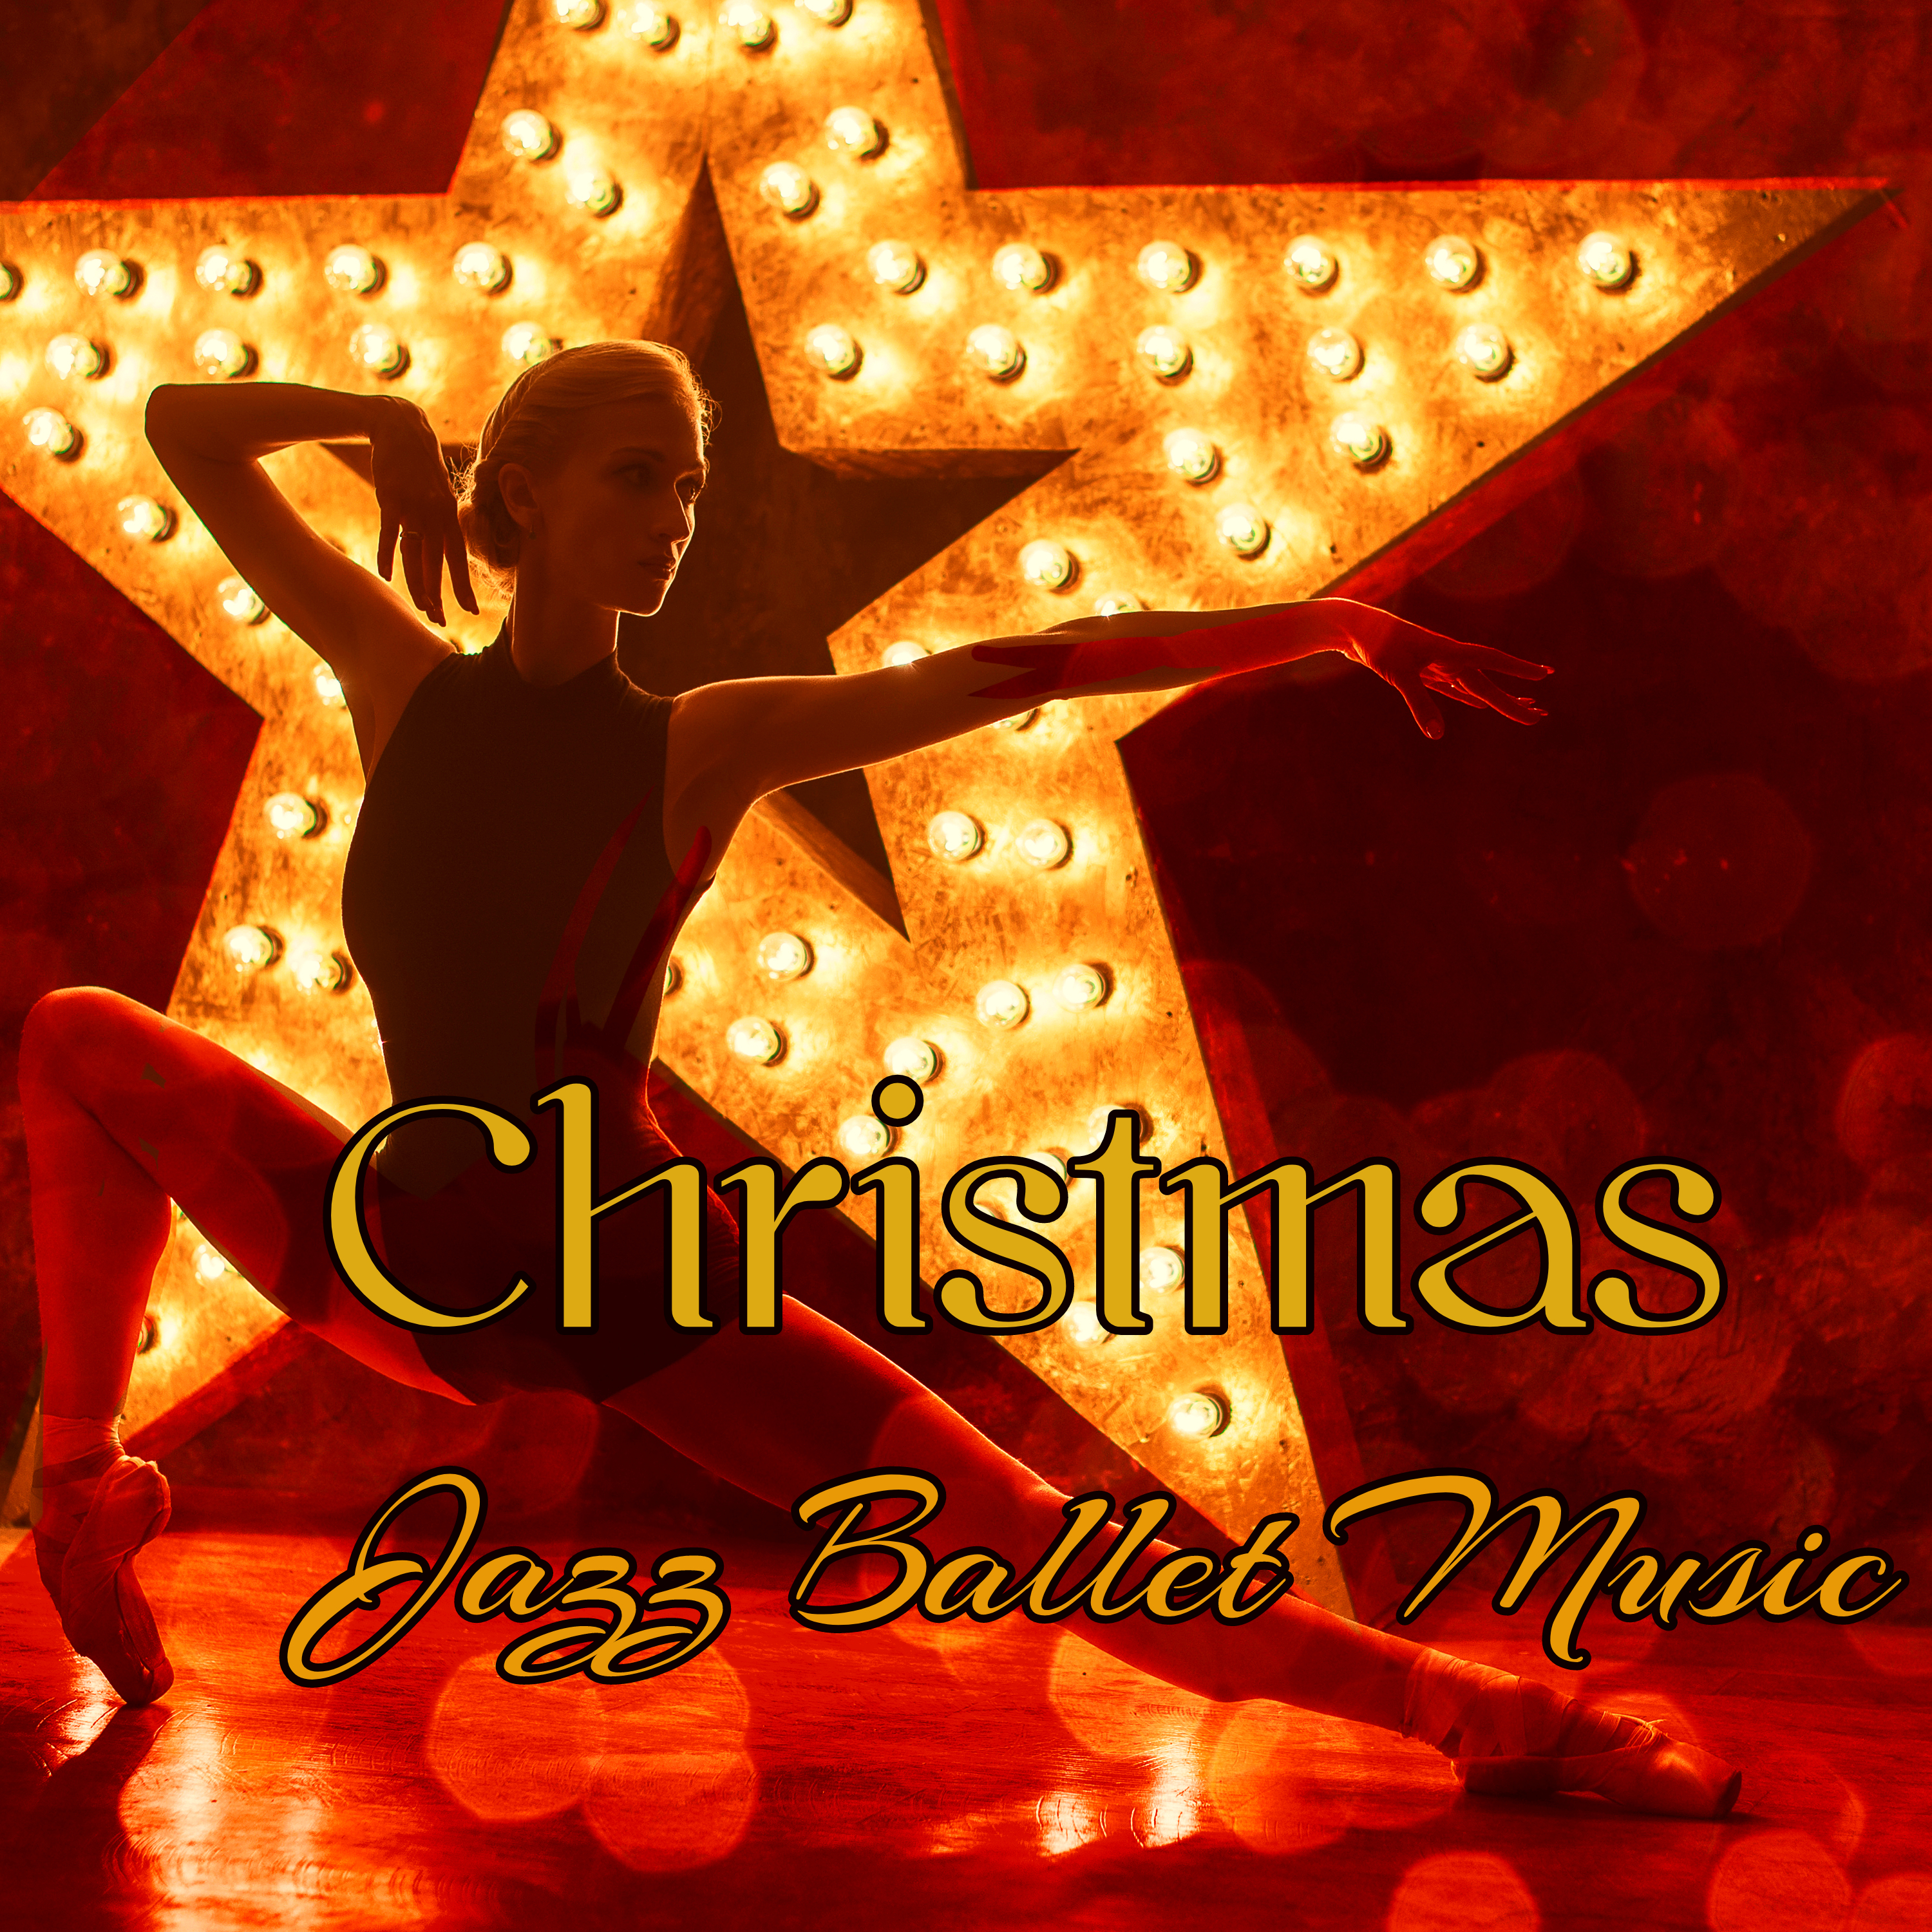 Christmas Jazz Ballet Music  Traditional  Classical Xmas Songs 2018 for Ballet and Modern Dance